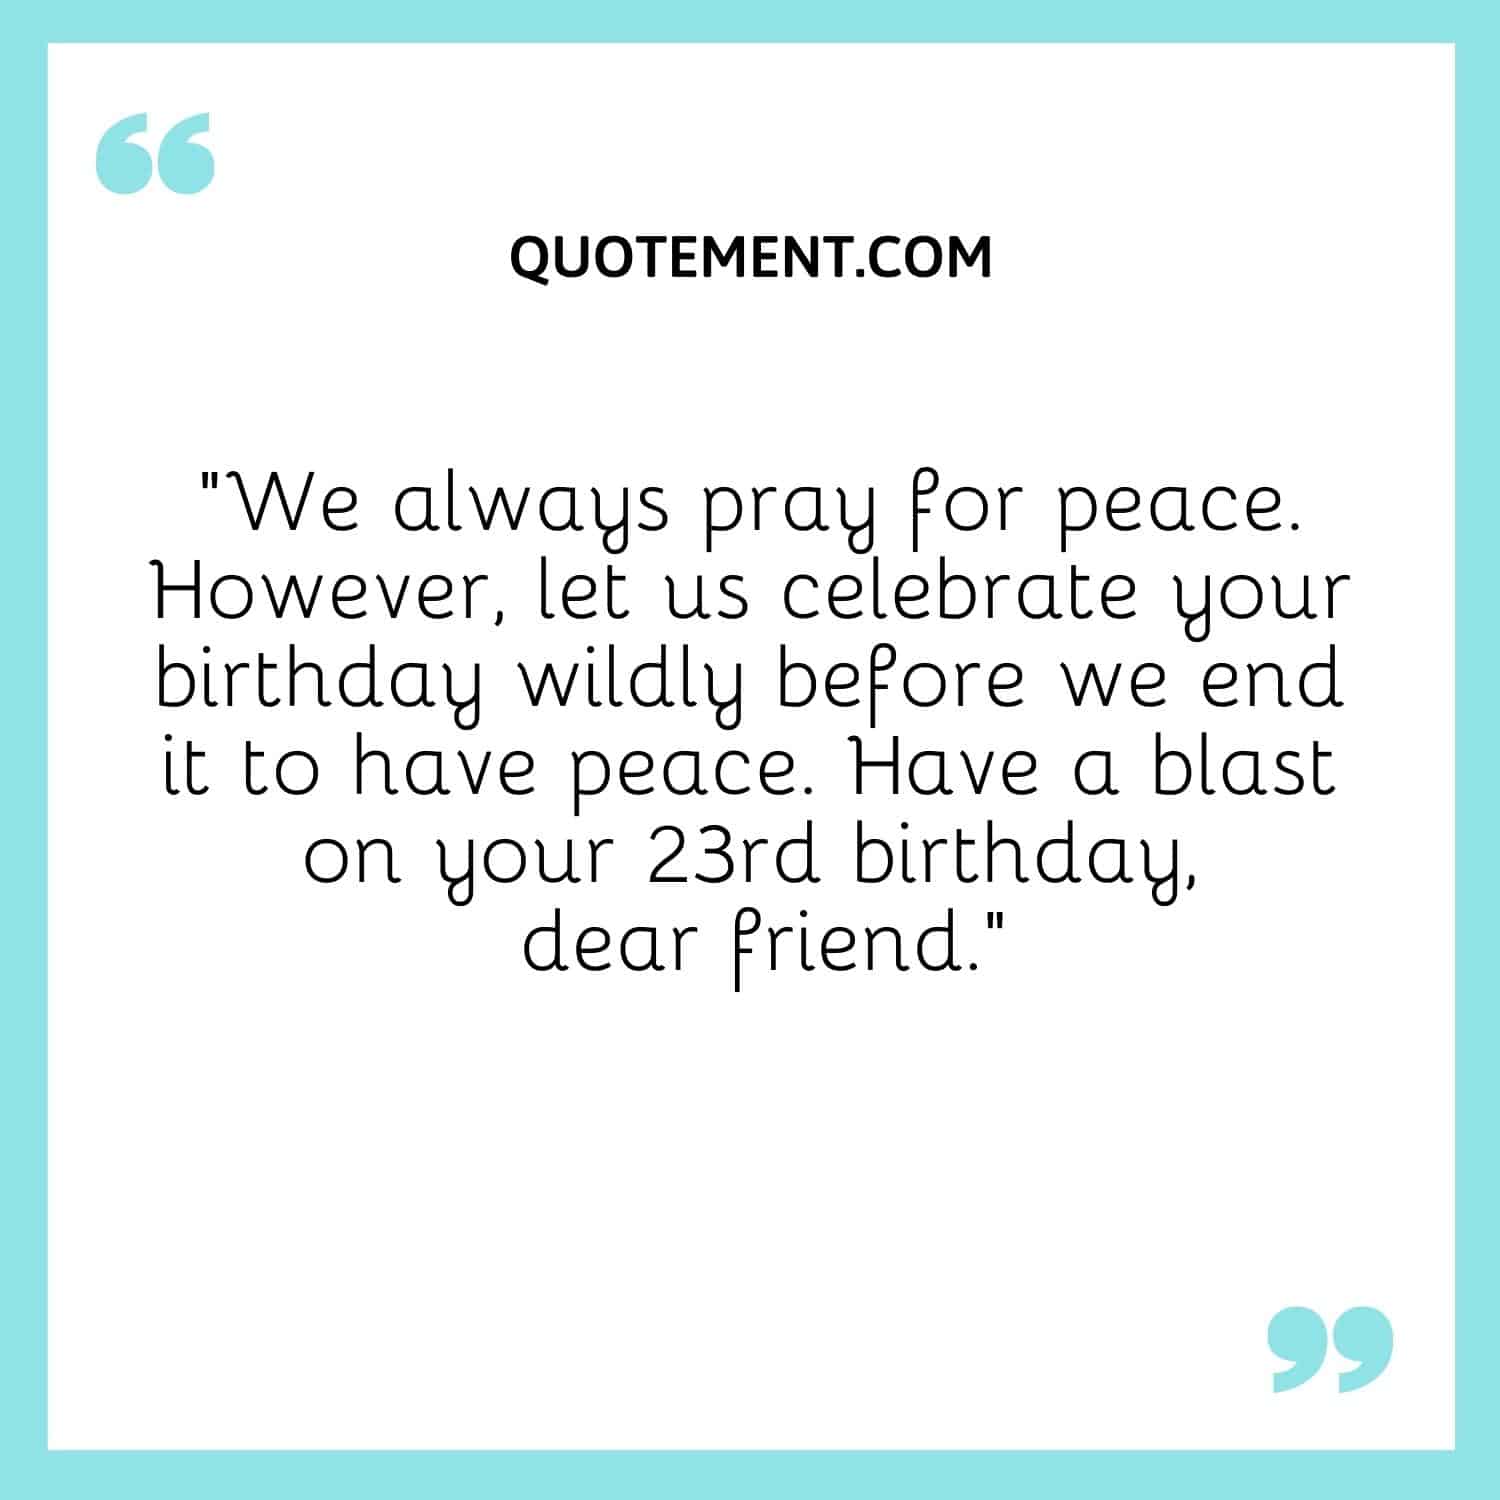 We always pray for peace. However, let us celebrate your birthday wildly before we end it to have peace